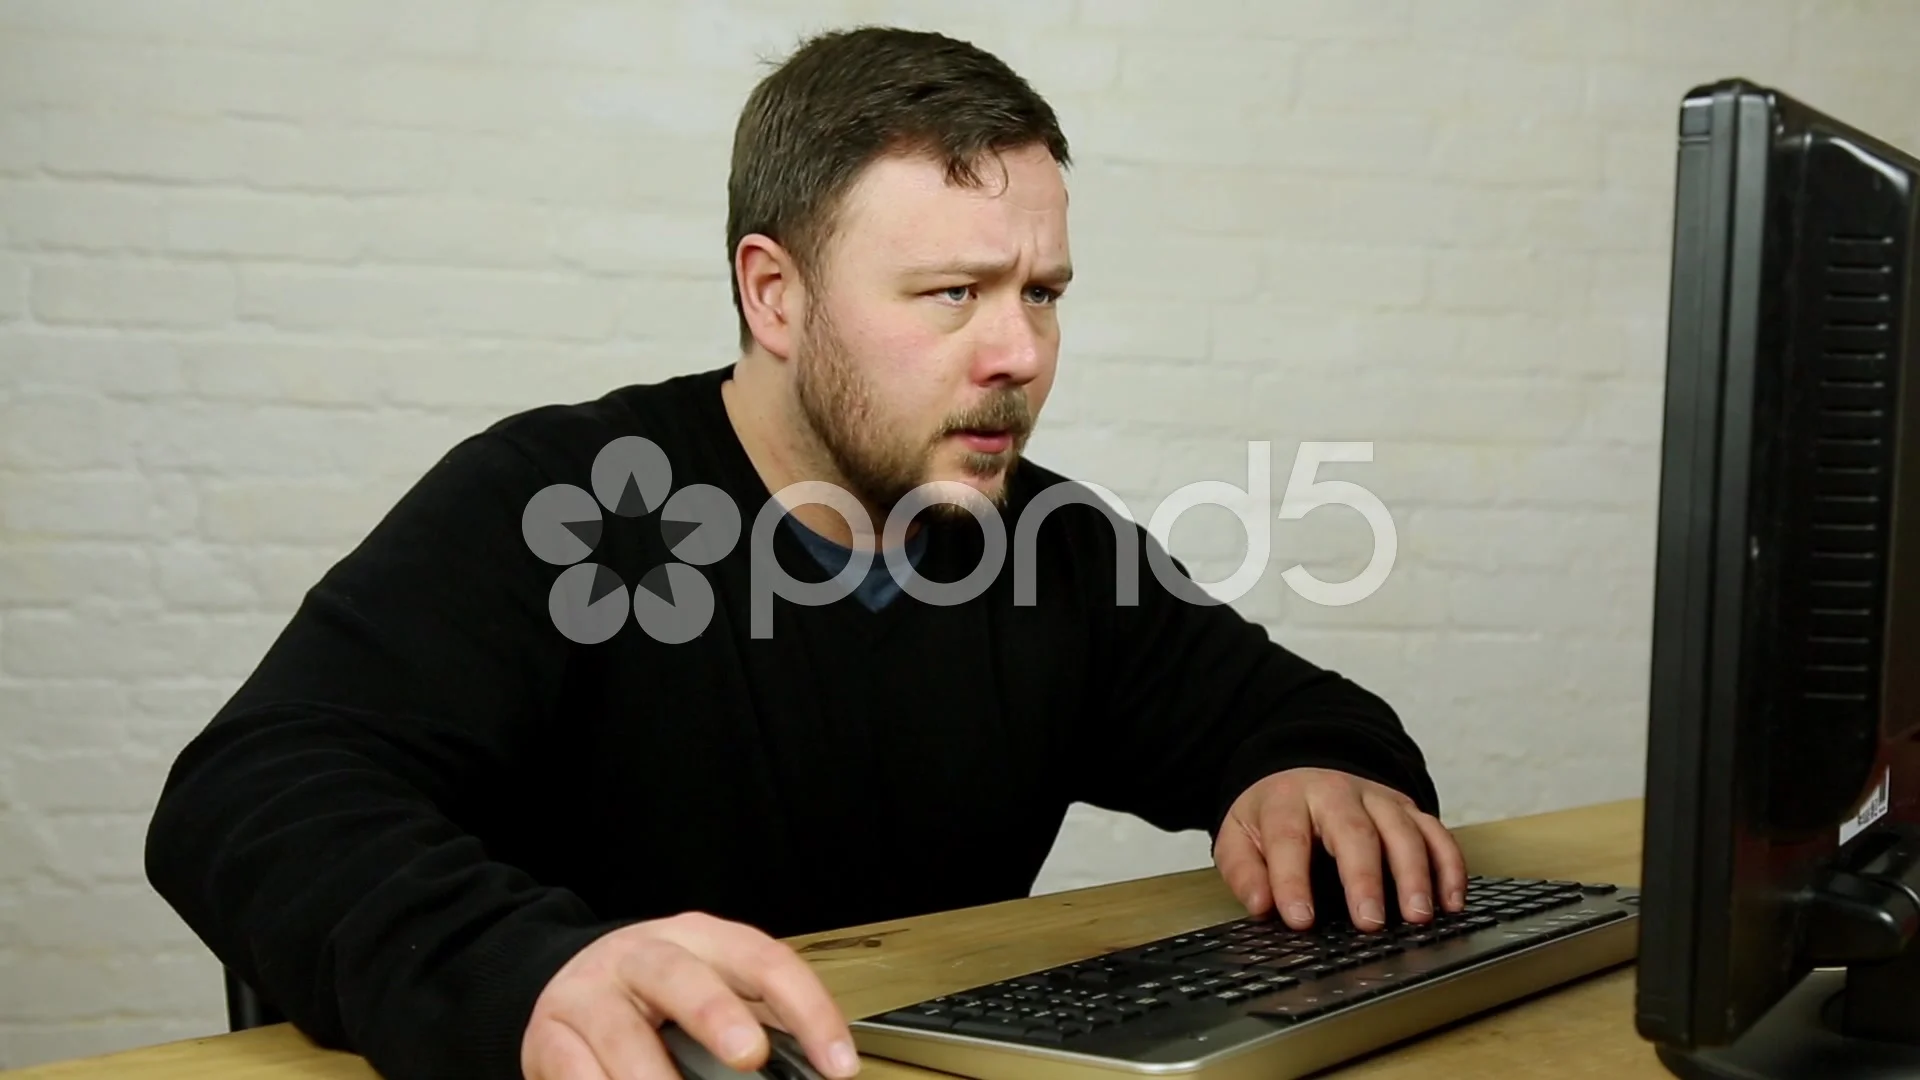 confused computer guy